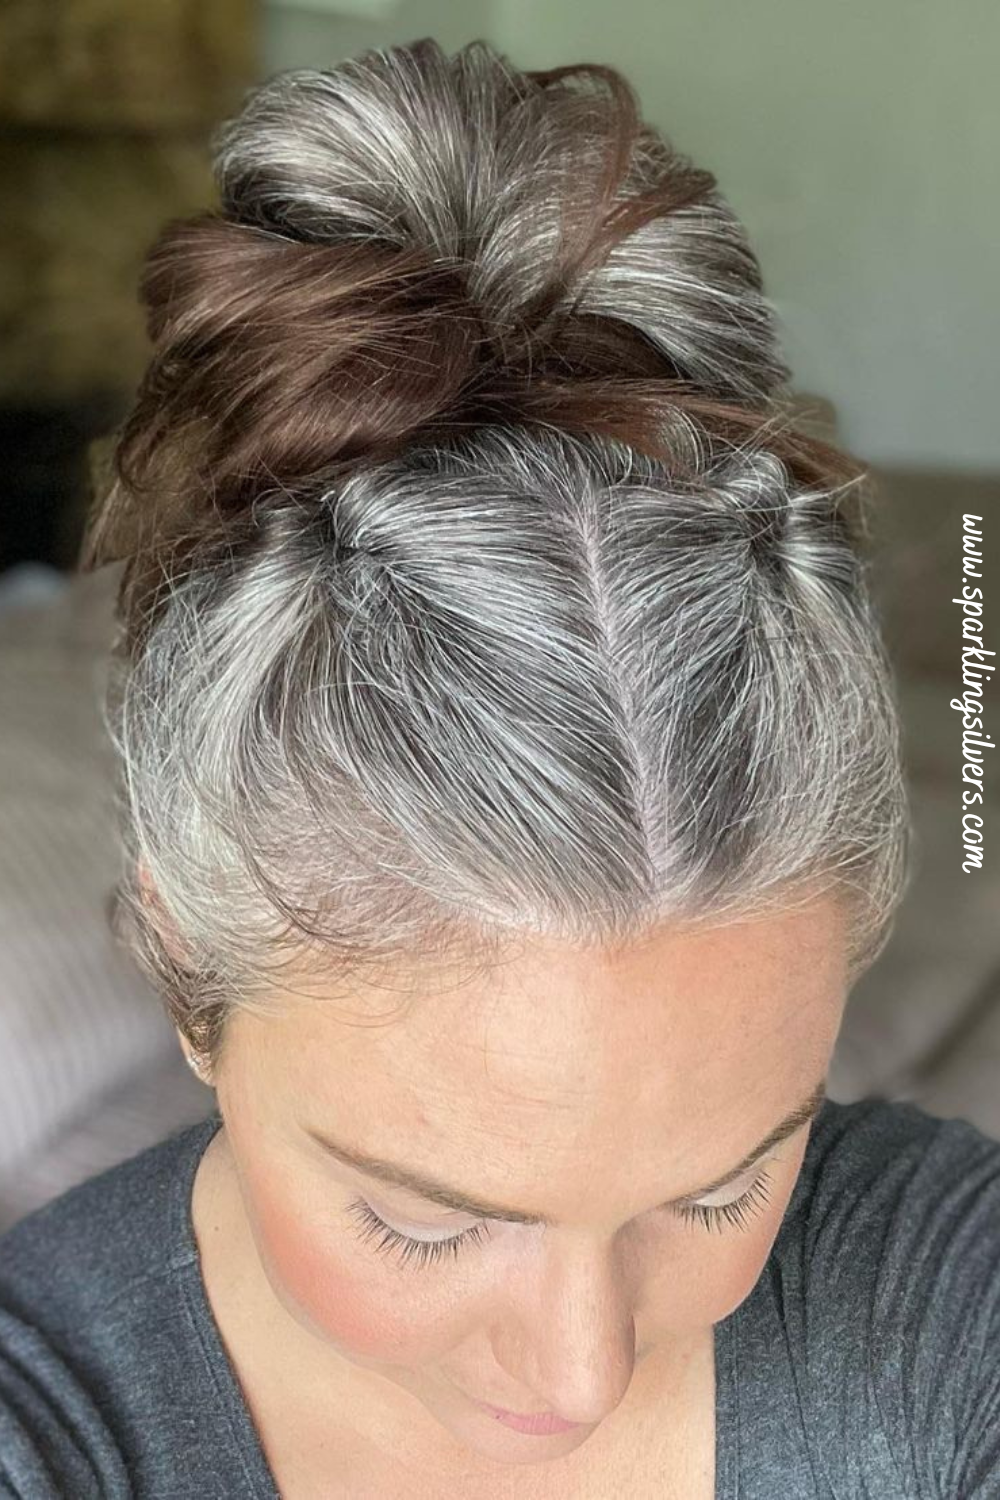 The Beauty of Grey: Embracing and Rocking Grey Hairstyles